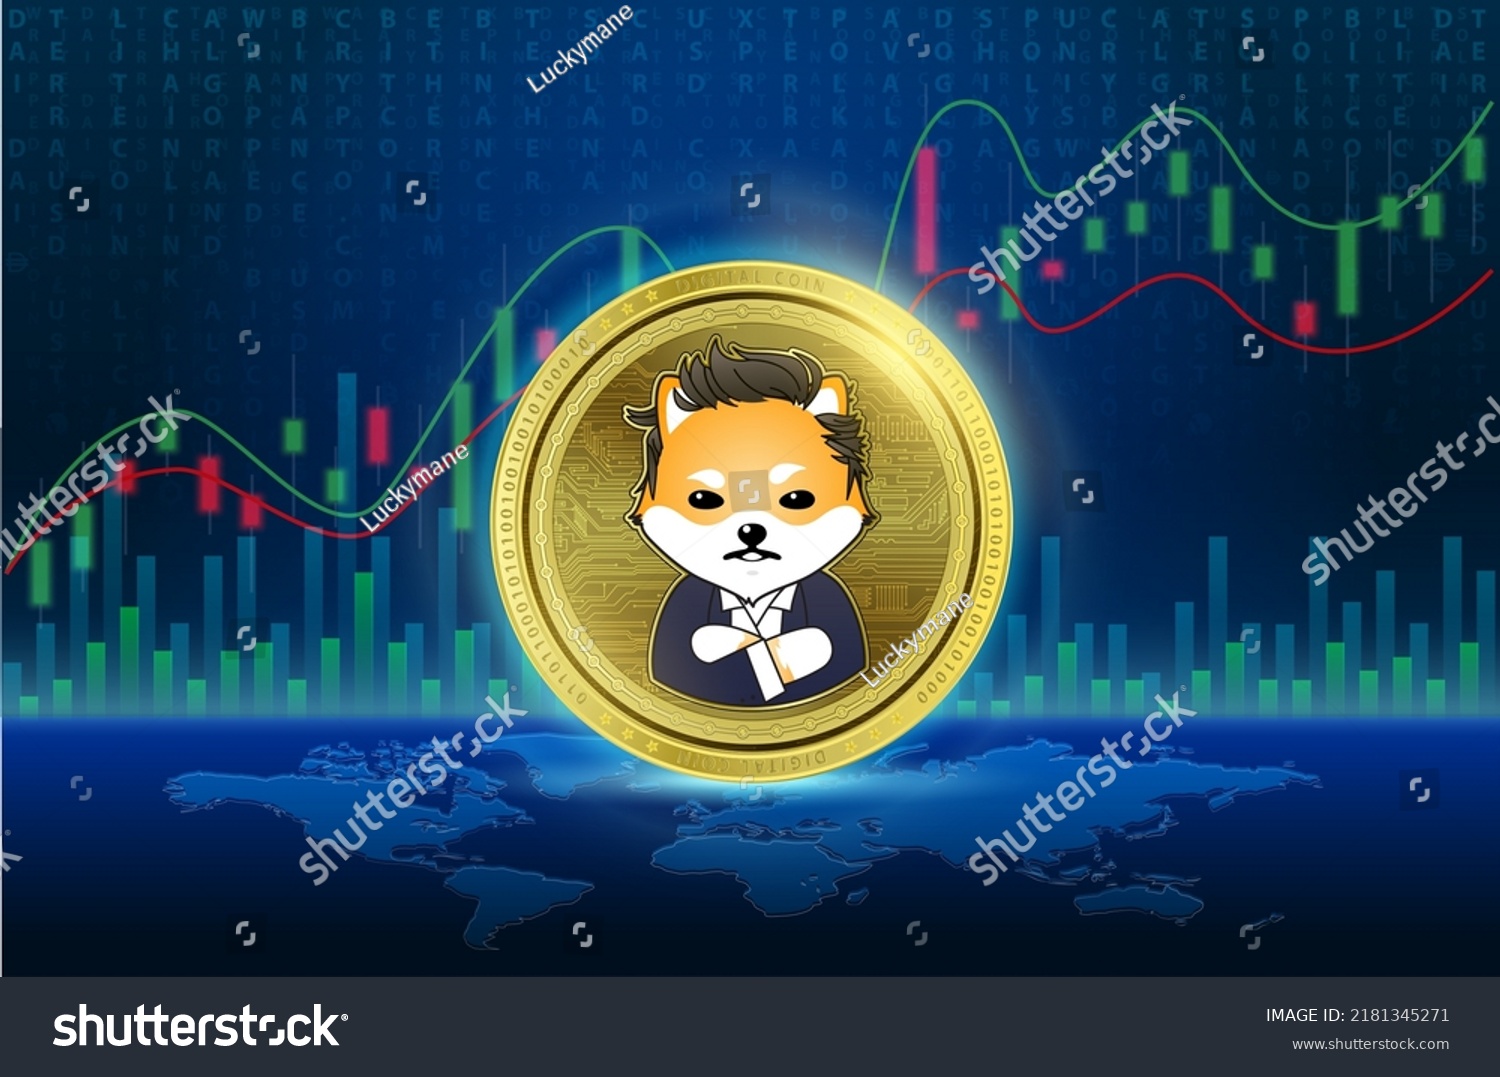 SVG of Dogelon Mars (ELON) gold coin Cryptocurrency blockchain. 3D Vector illustration. List of variou coin symbol is background. Future digital replacement technology alternative currency. gold stock chart. svg